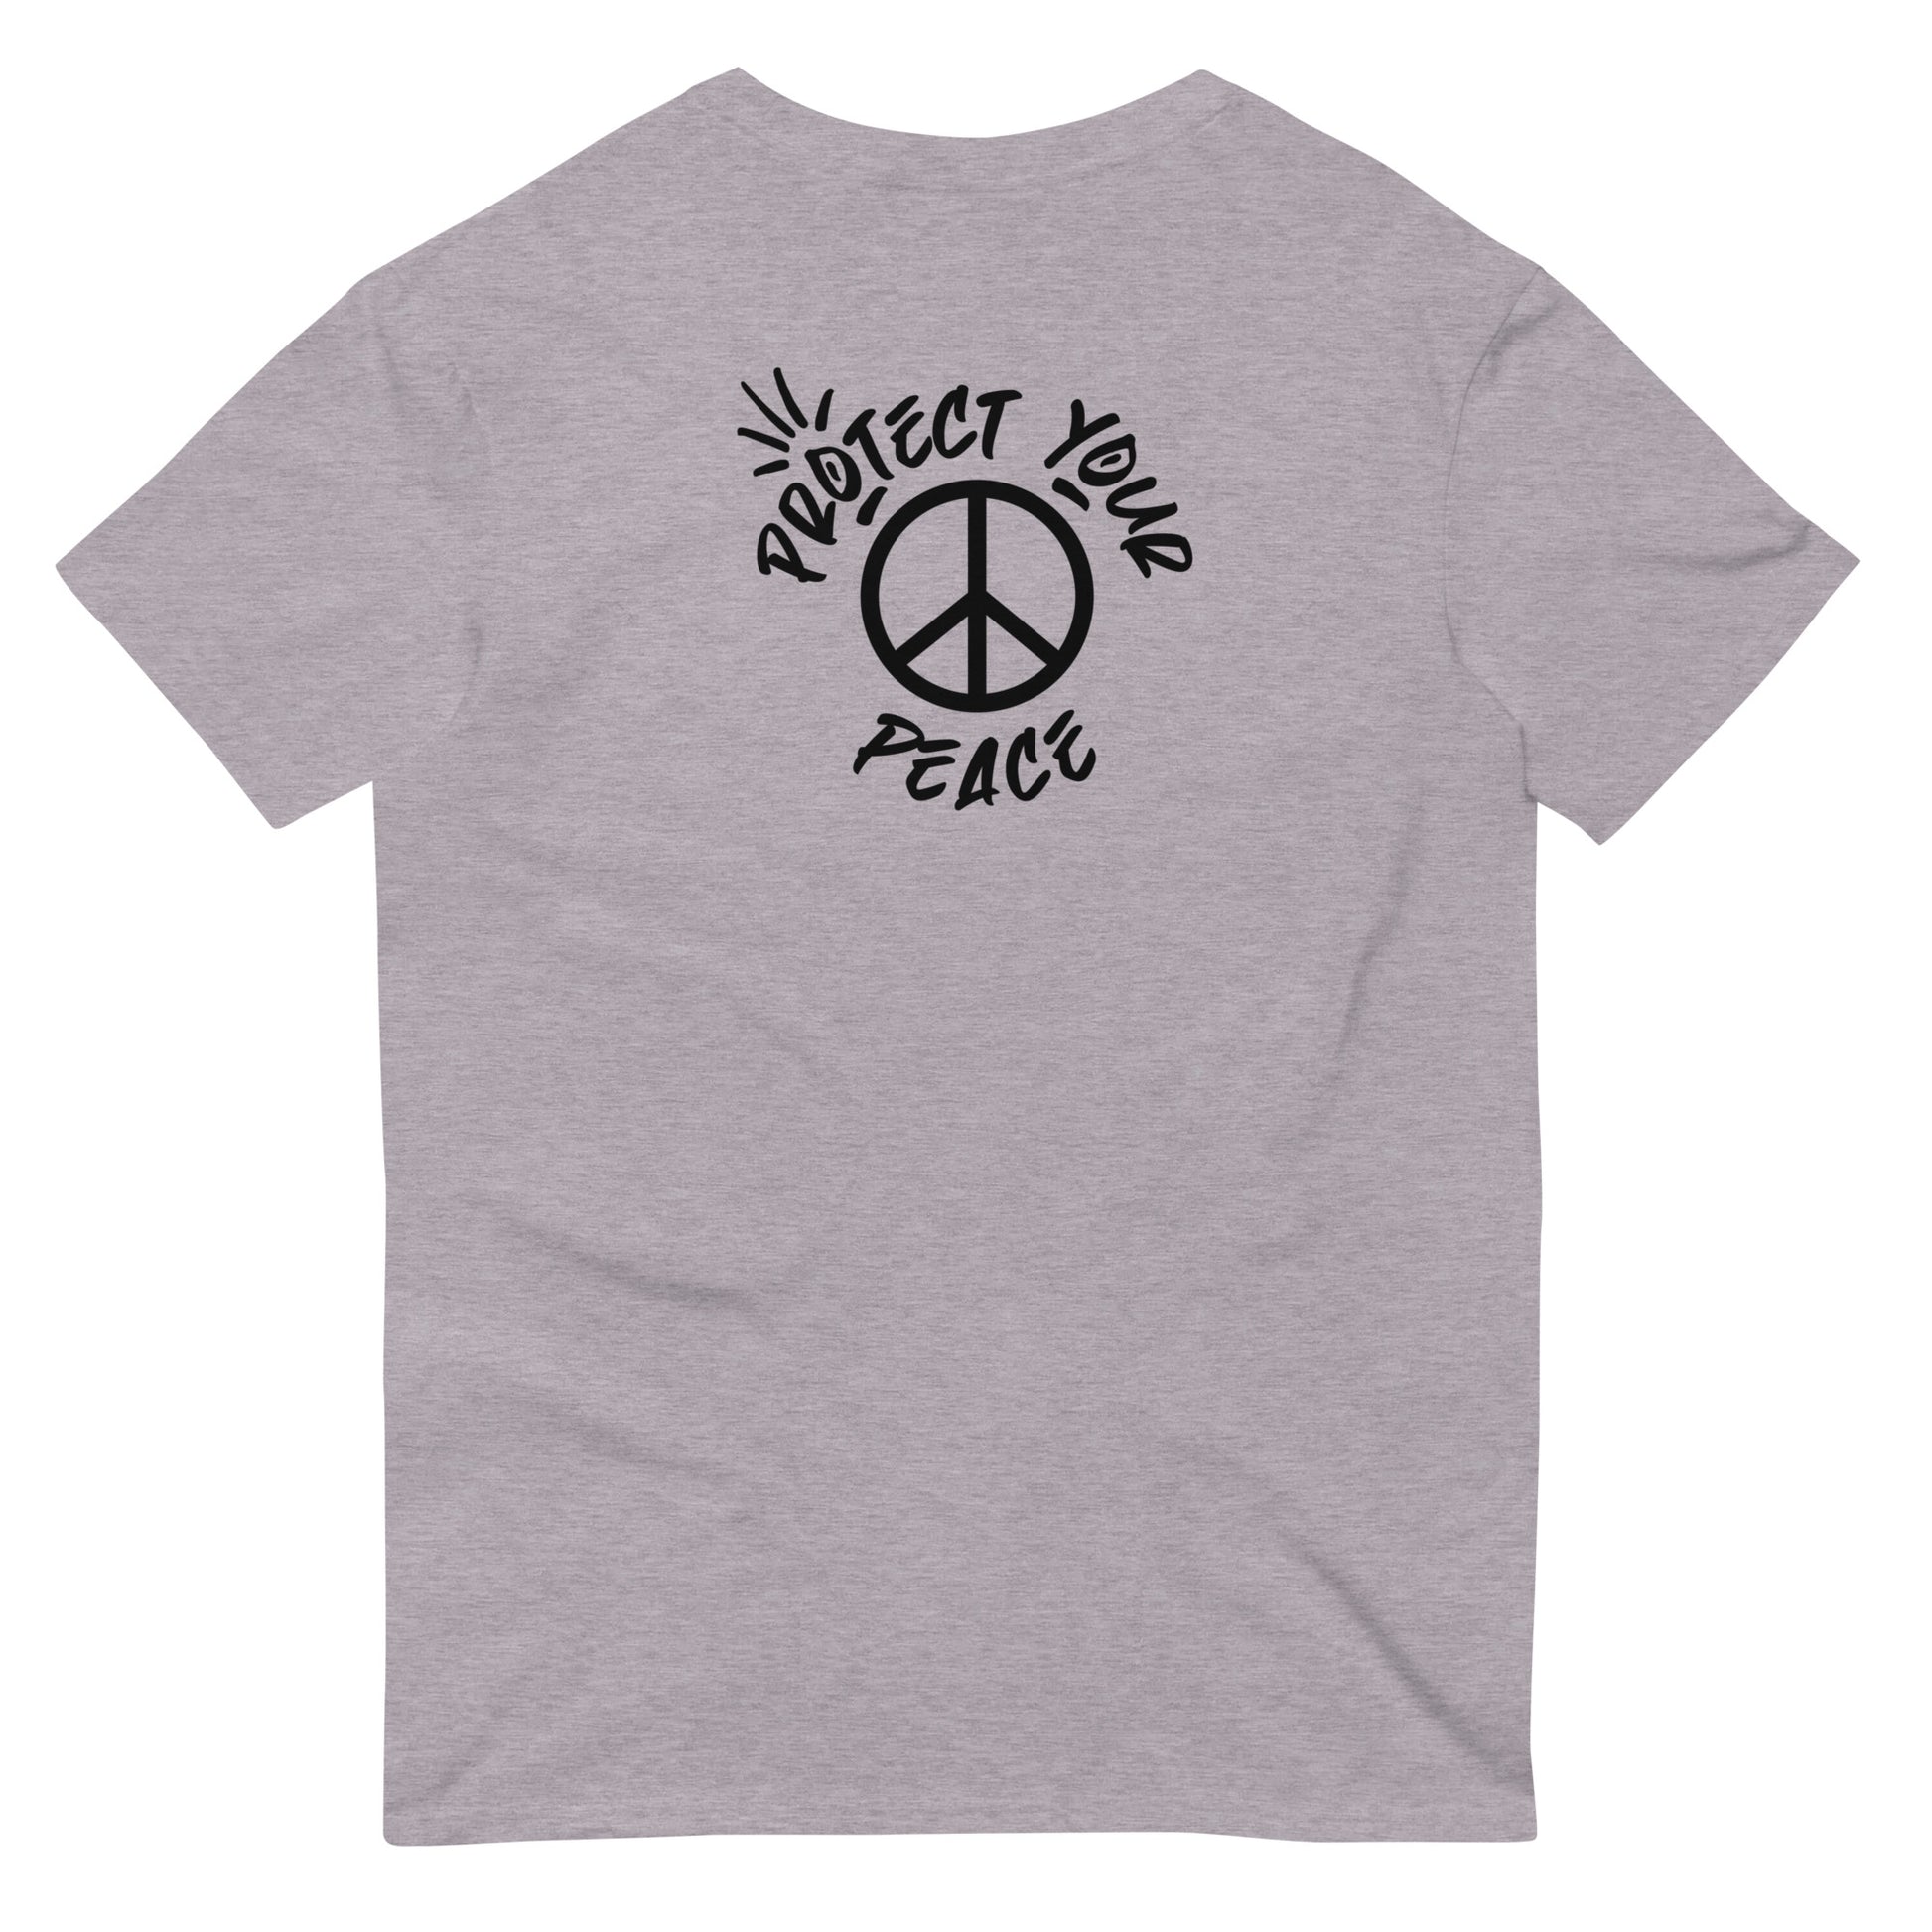 Casual yet impactful 'Stay Weird - Protect Your Peace' t-shirt on a model, promoting peace and individuality.